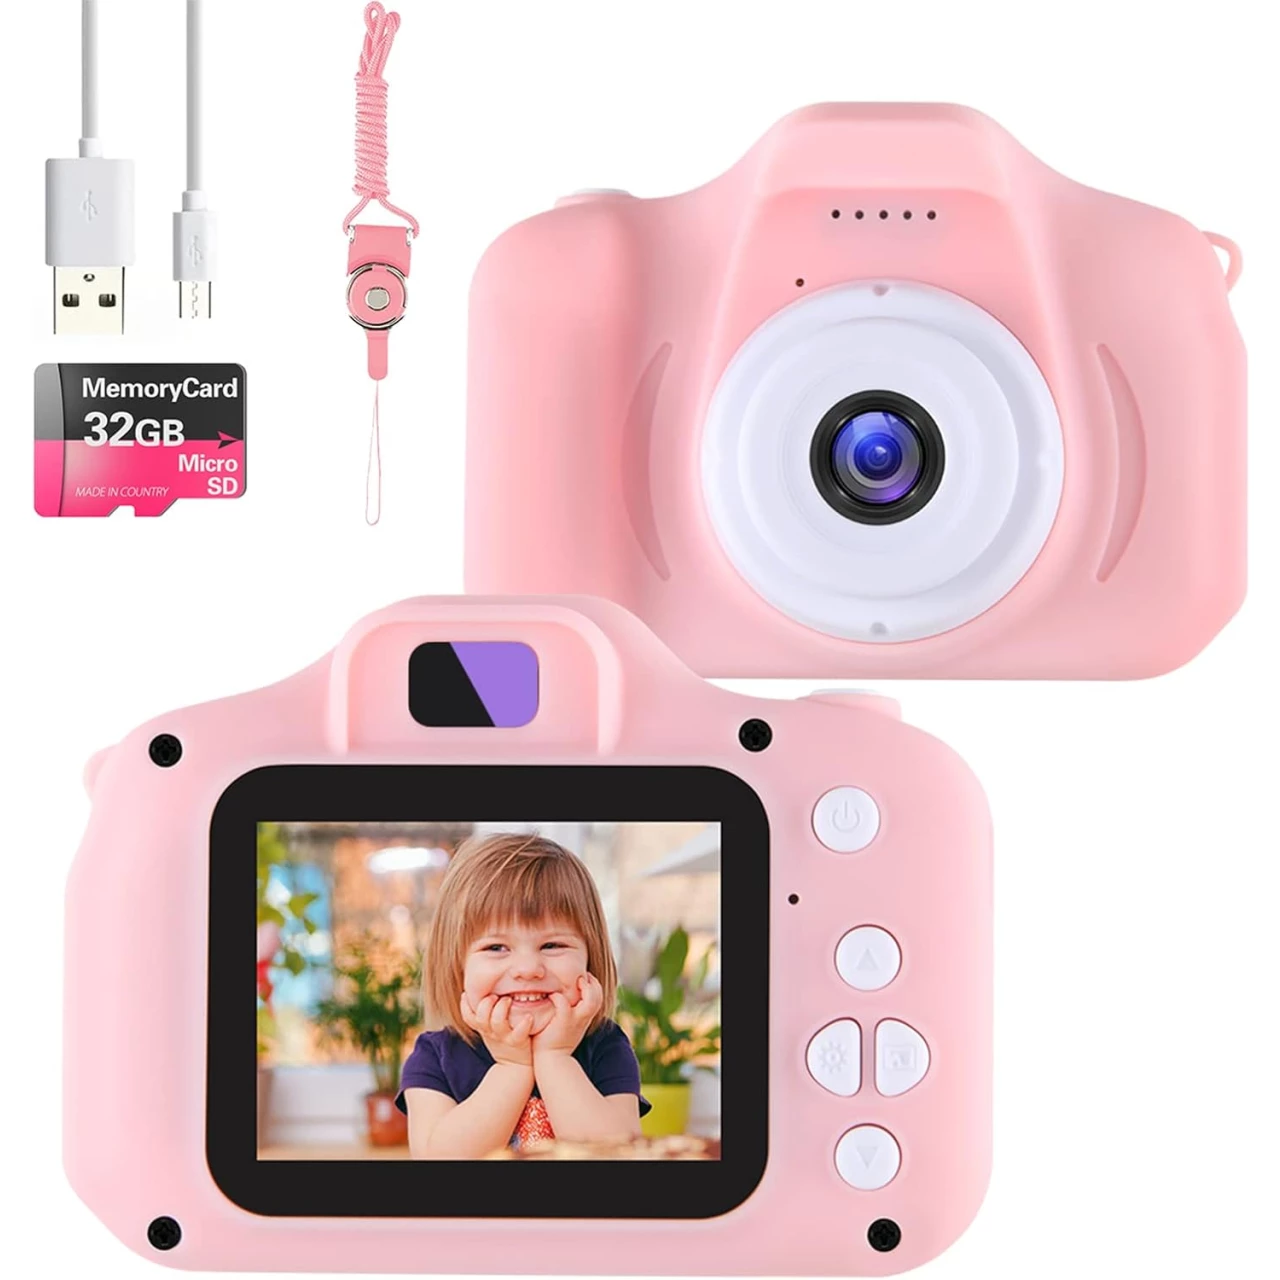 NINE CUBE Kids Camera Little Toys Camera for 3-7 Year Old Girls,Toddler Video Recorder 1080P 2 Inch,Children Digital Camera Birthday Festival Gift for 3 4 5 6 7 Year Old Boys(32G SD Card)